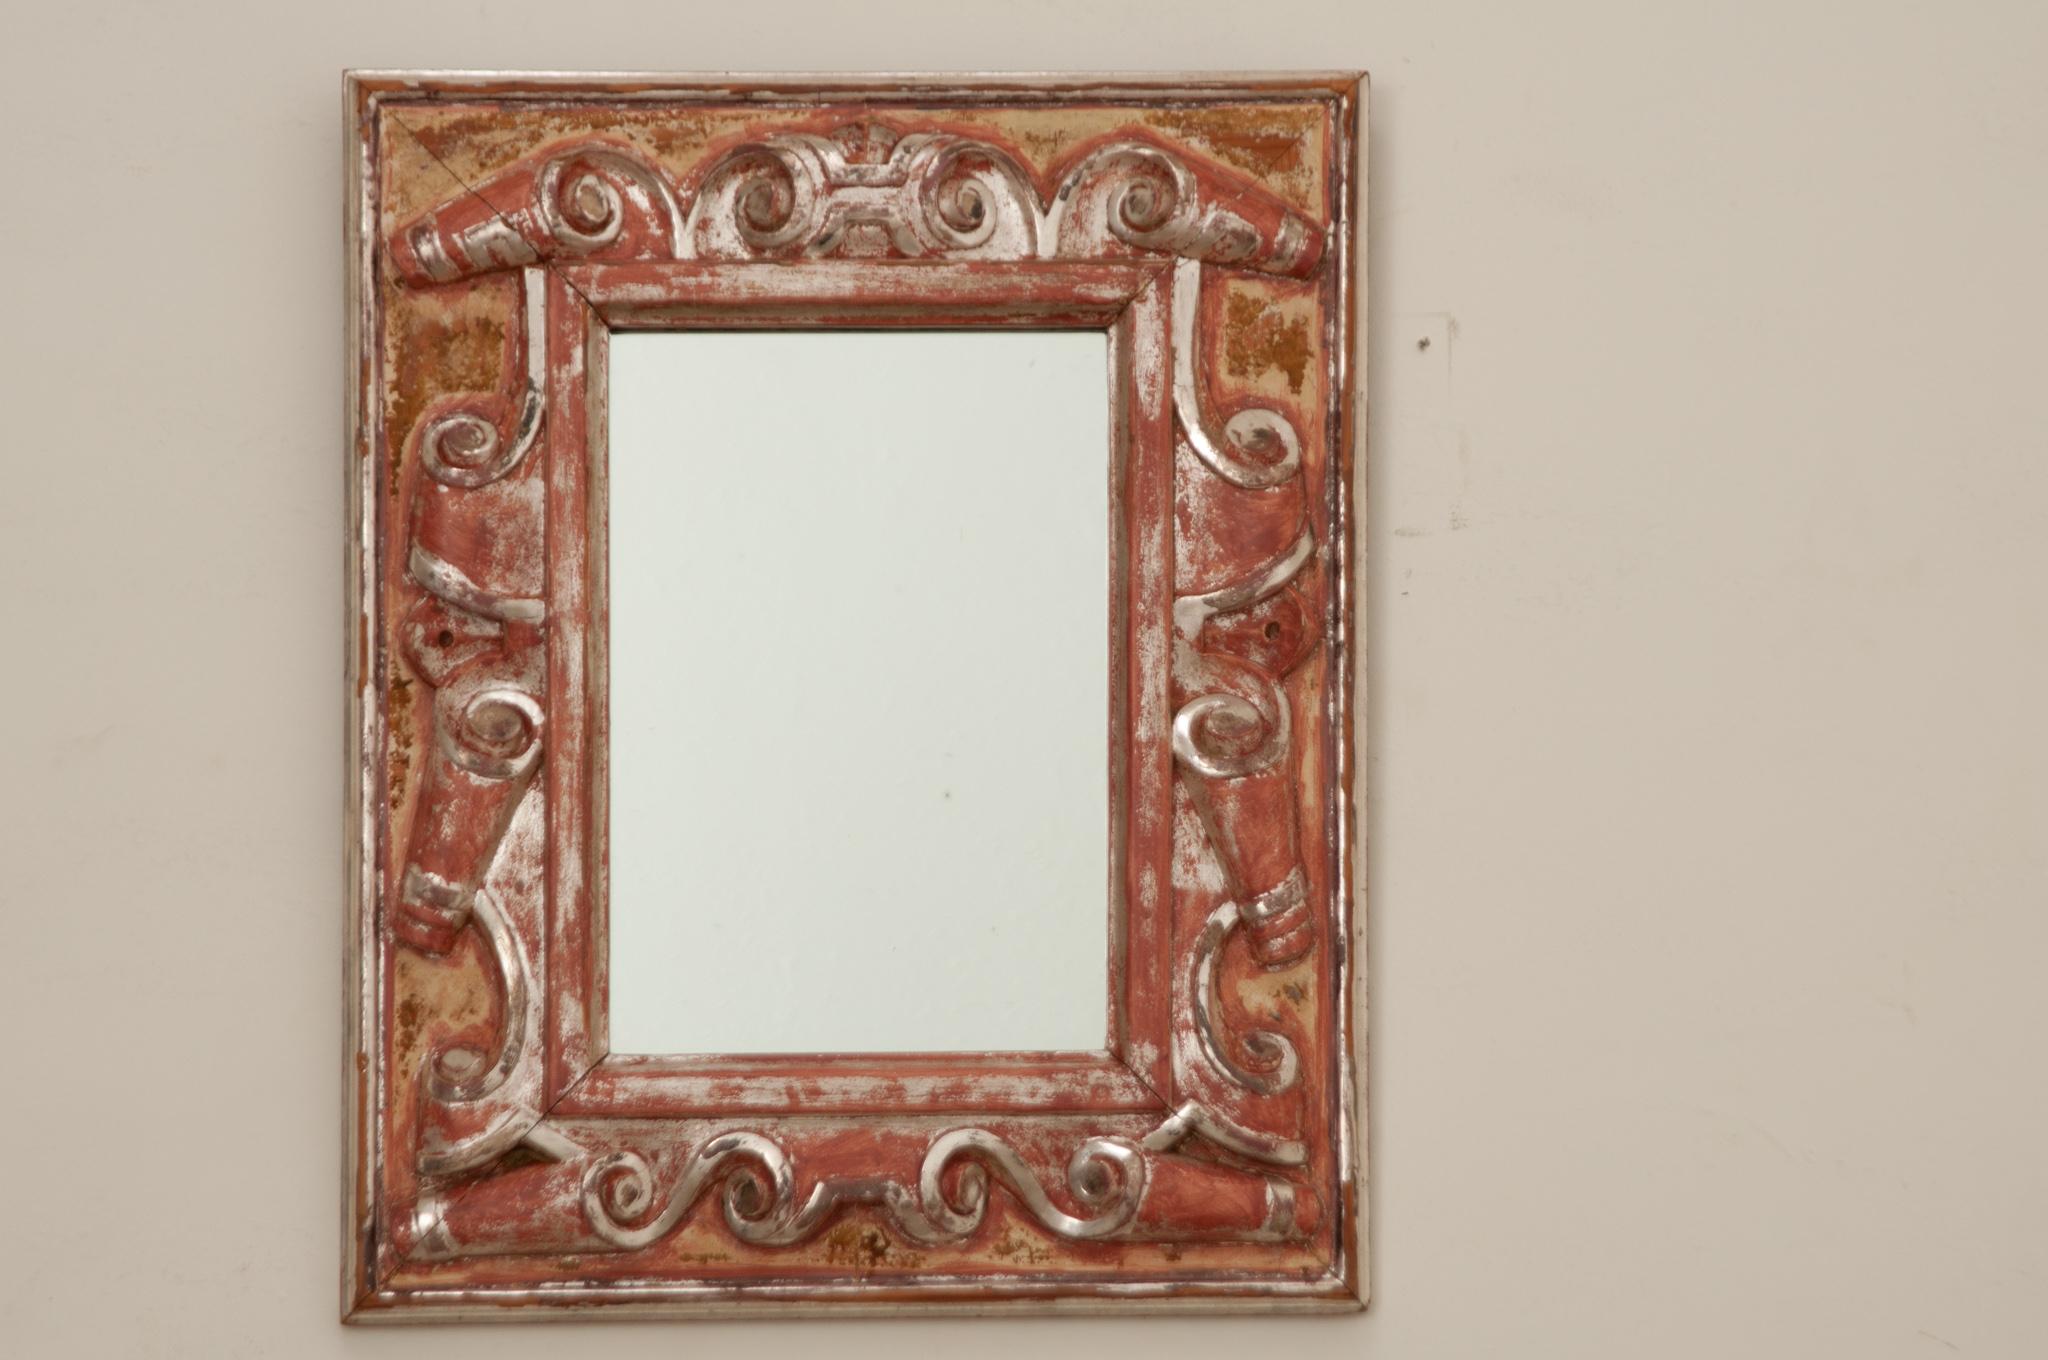 A lovely and unique Italian giltwood carved mirror made in the 19th Century. This silver gilded rectangular mirror is eye-catching with richly carved scrolls decorating the frame. The surround is beautifully colored by age, showing the remaining